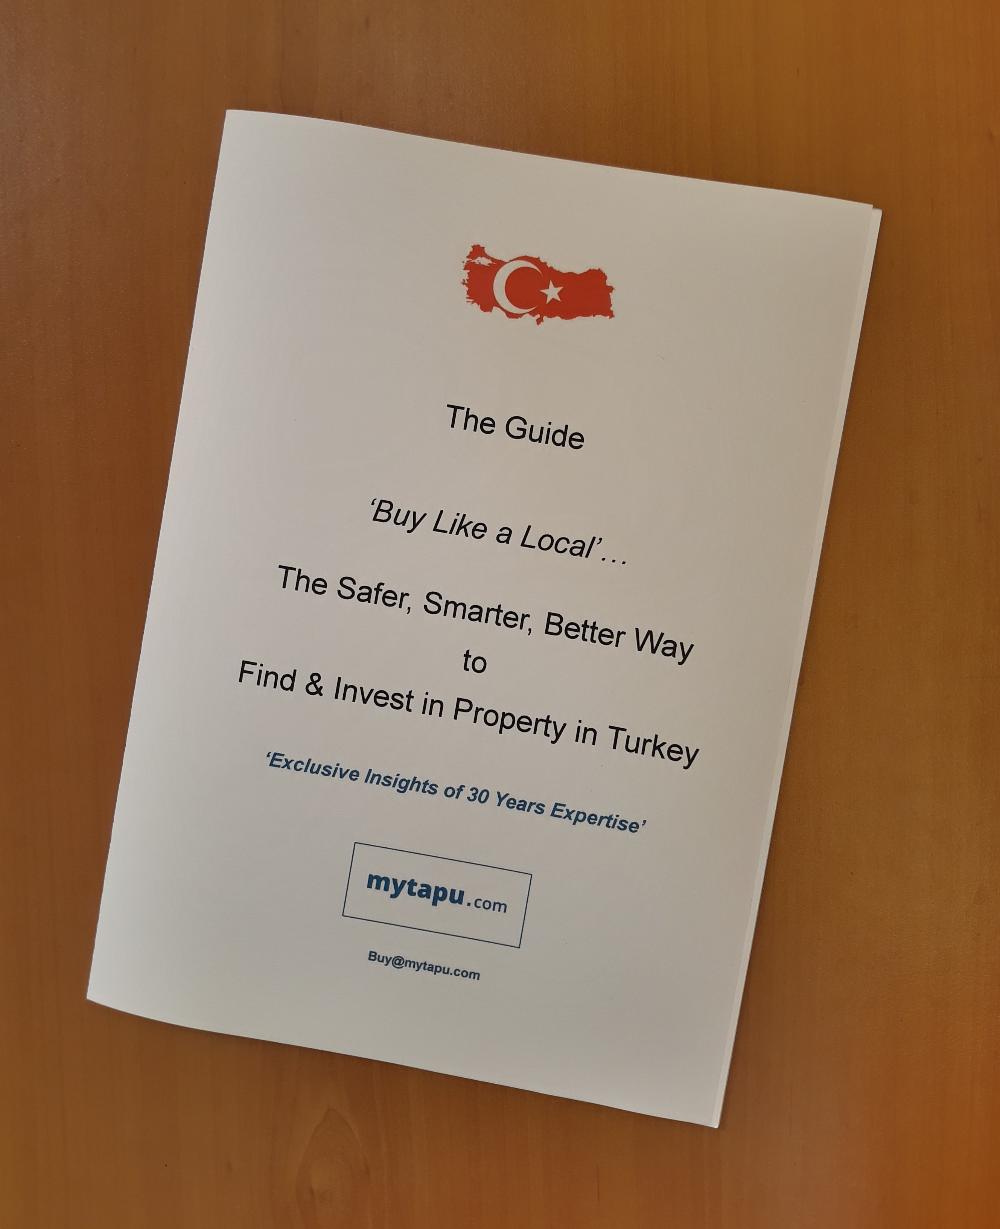 The Guide: How Real Estate Citizenship Investors in Property i Turkey can Buy Like a Local; a Safer, Smarter, Better Way to Buy Property in Turkey